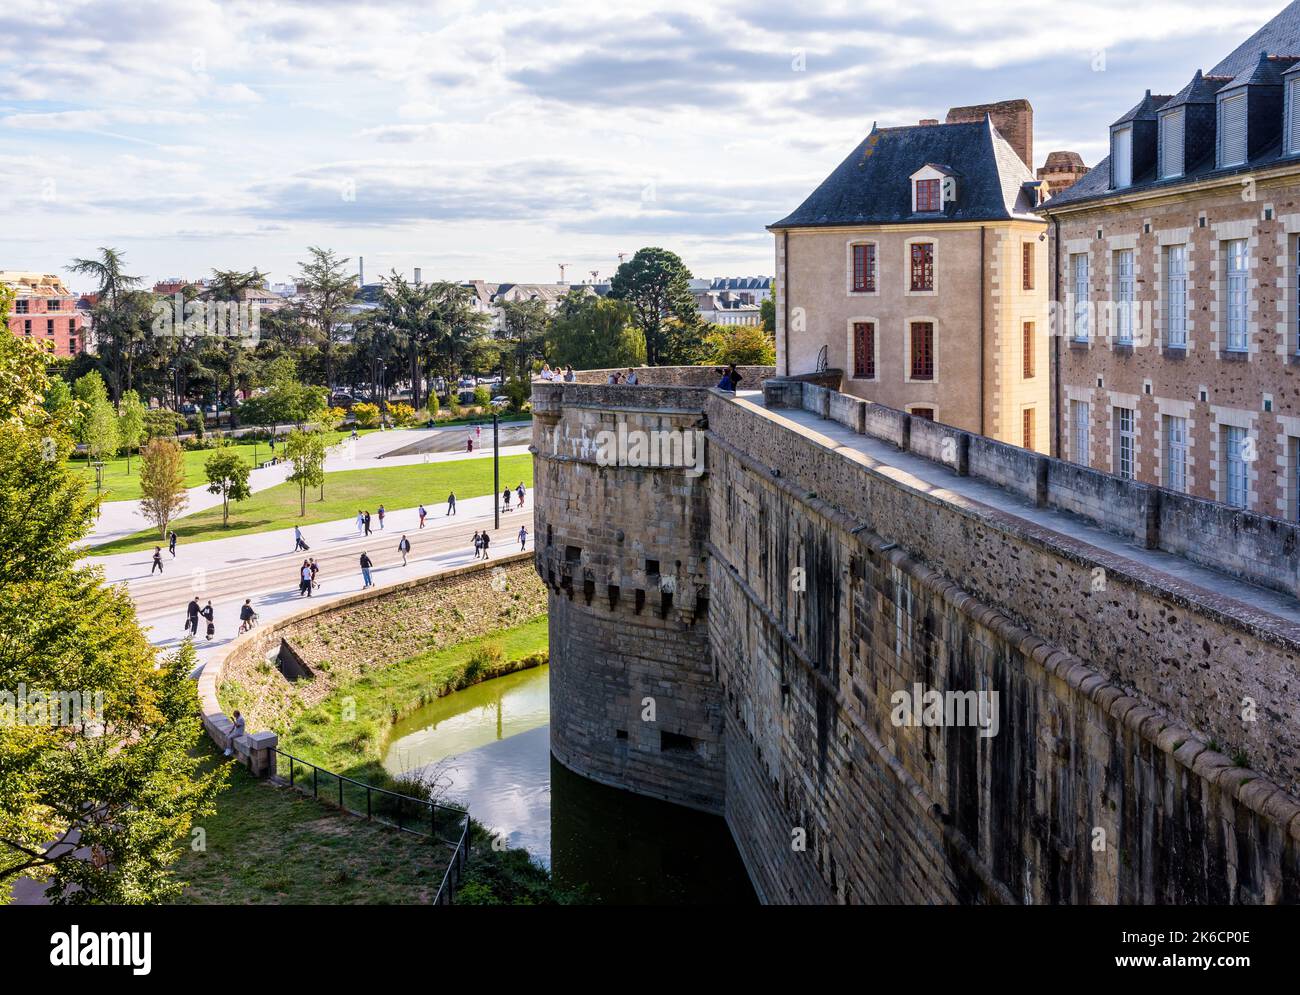 View over the ramparts and moat of the Château des ducs de Bretagne (Castle of the Dukes of Brittany) in Nantes, France. Stock Photo